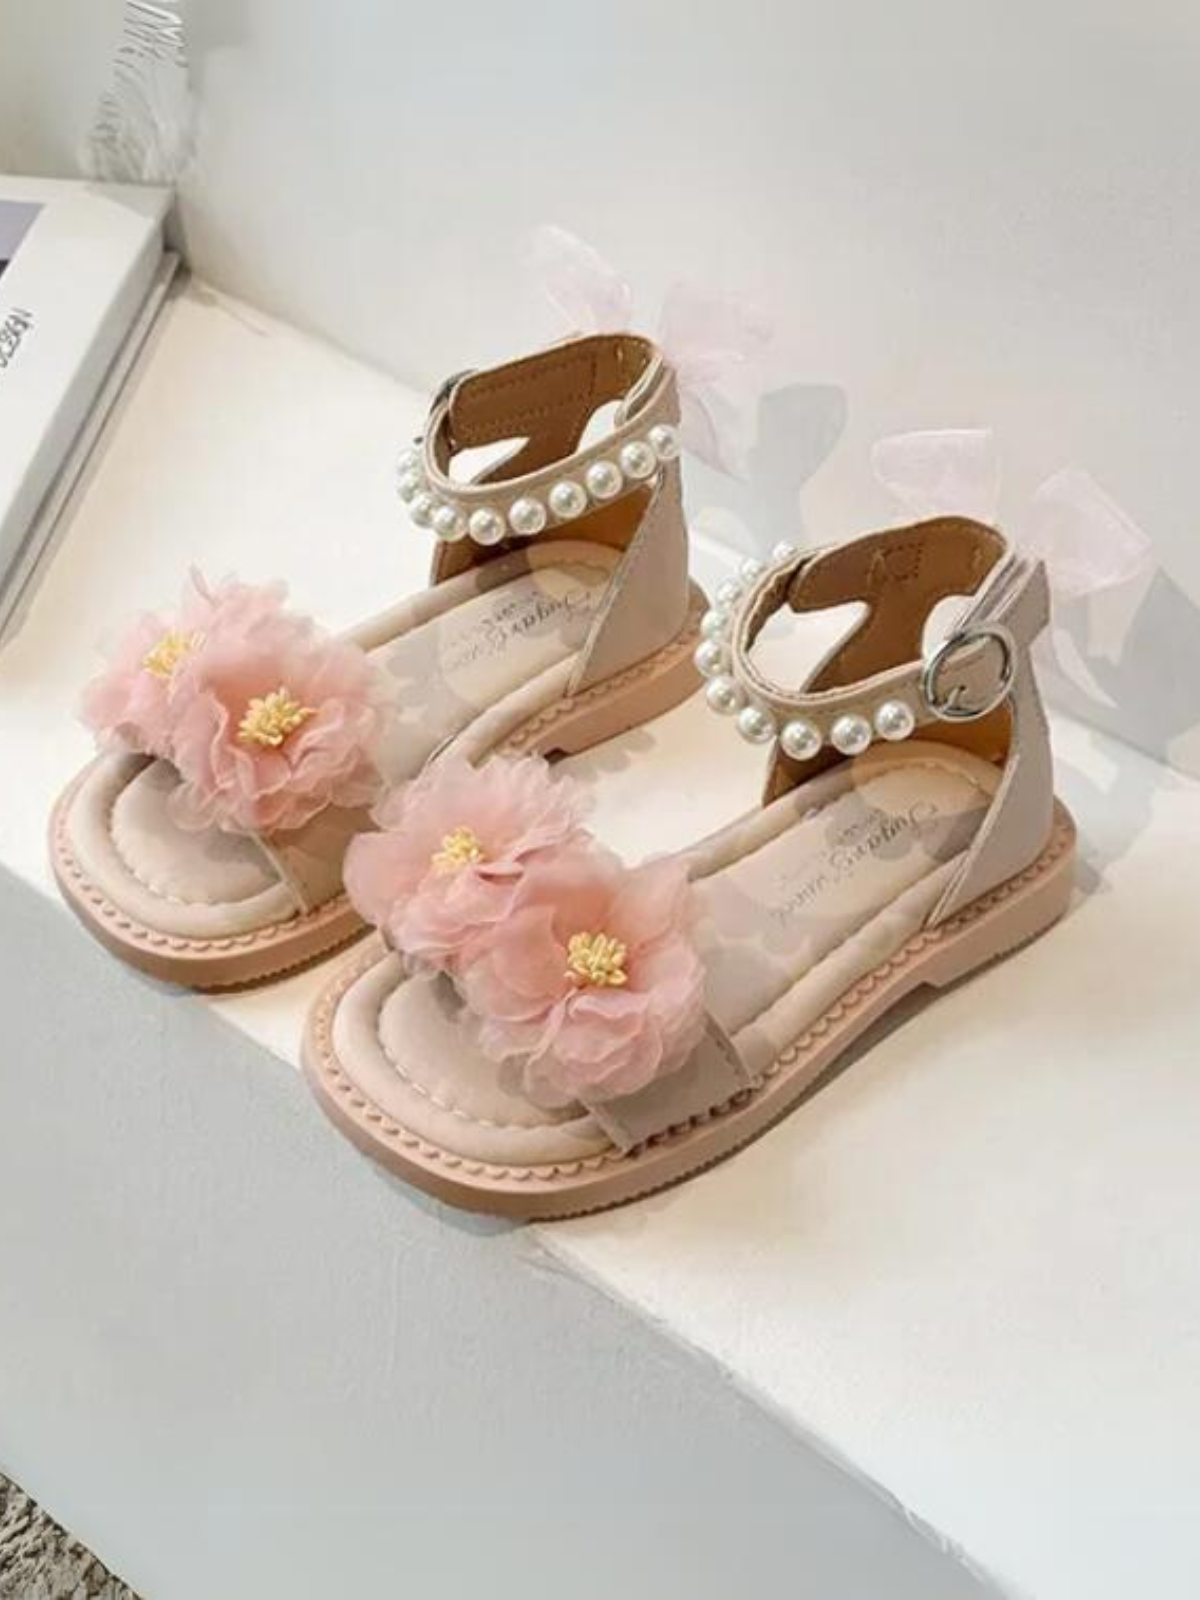 Floral Charm Sandals with Pearls and Bows By Liv and Mia